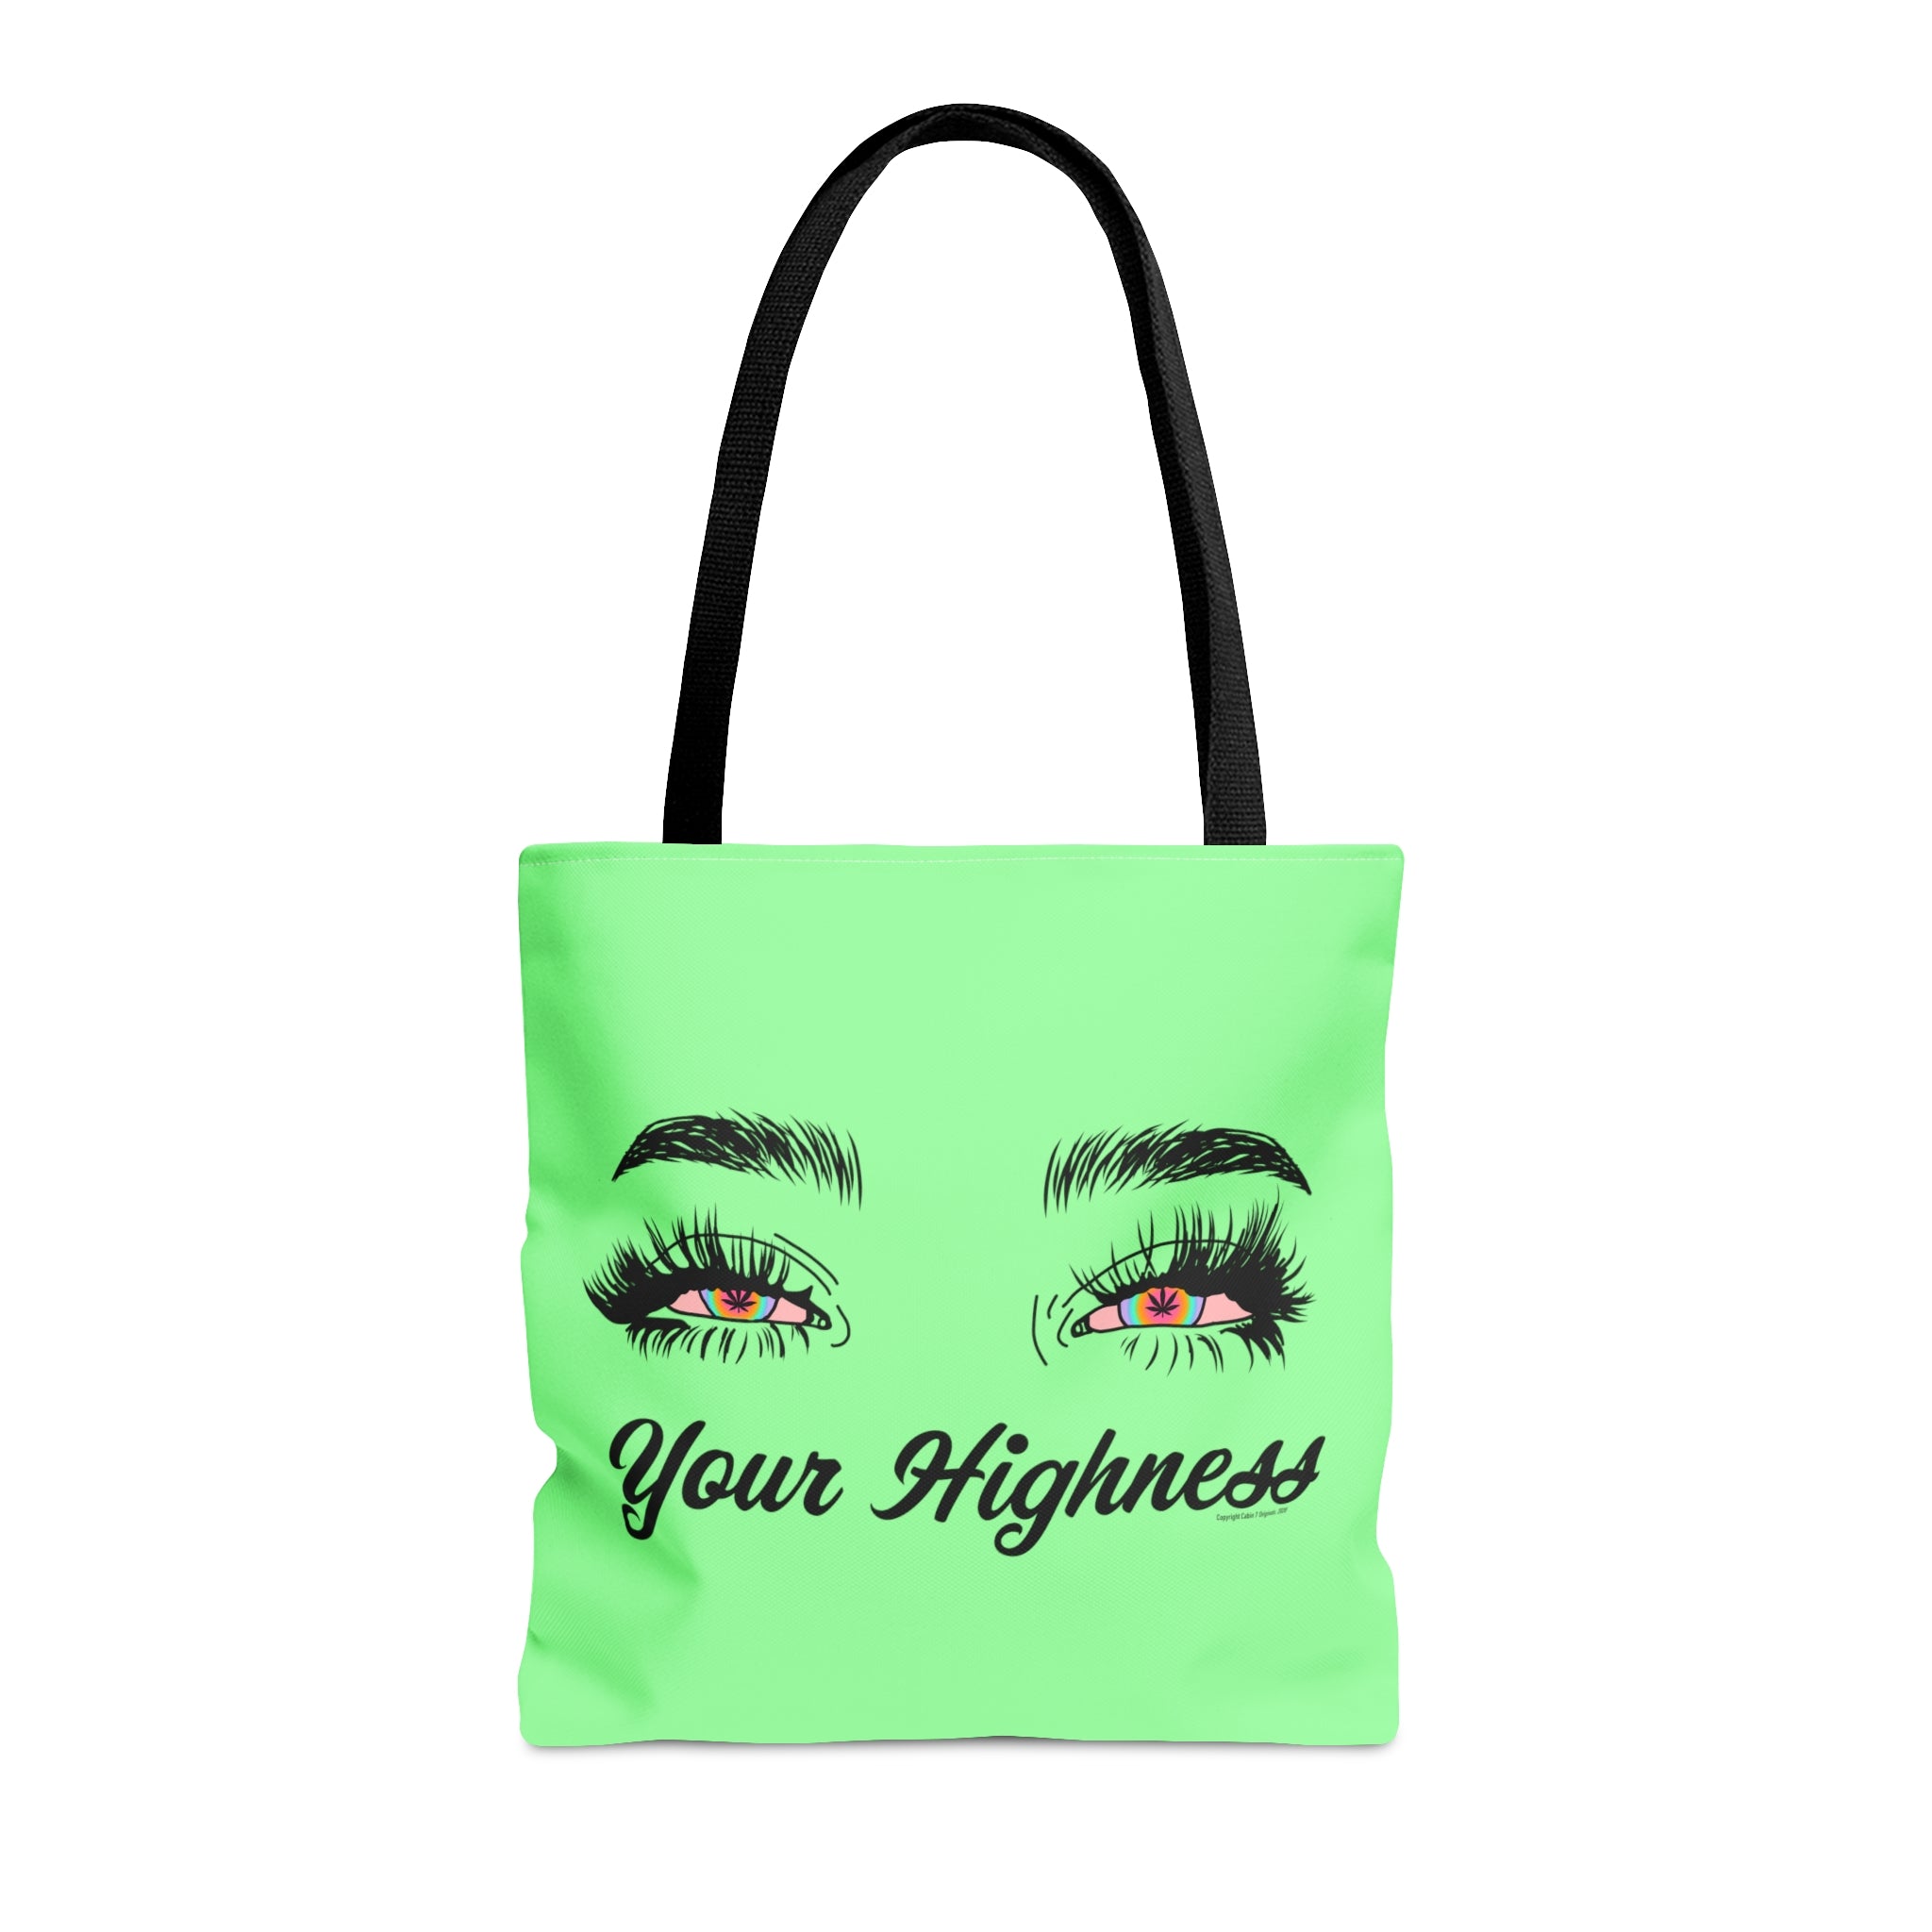 Your Highness Tote Bag